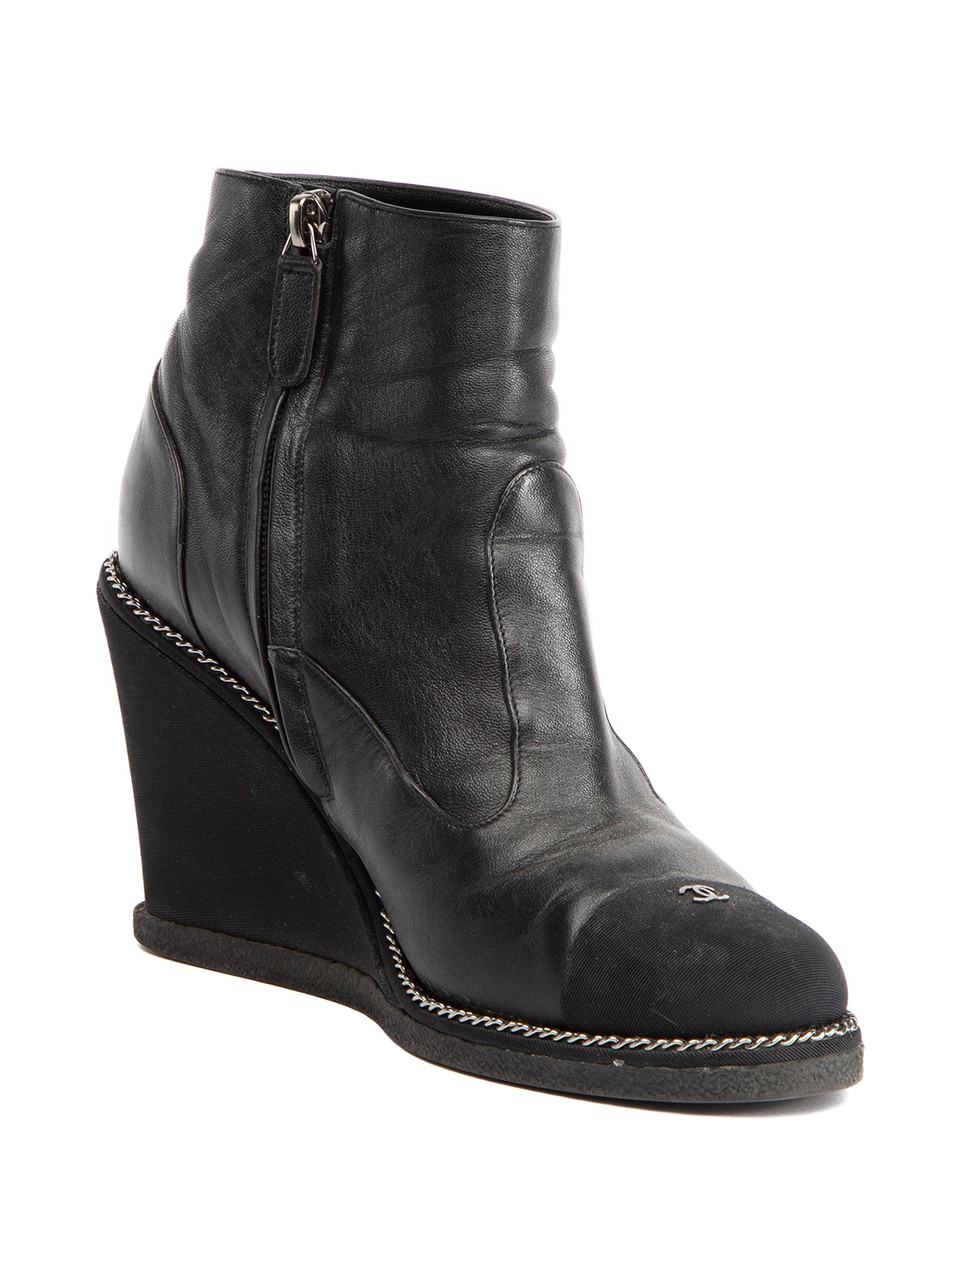 Chanel Hidden Wedge Ankle Boots